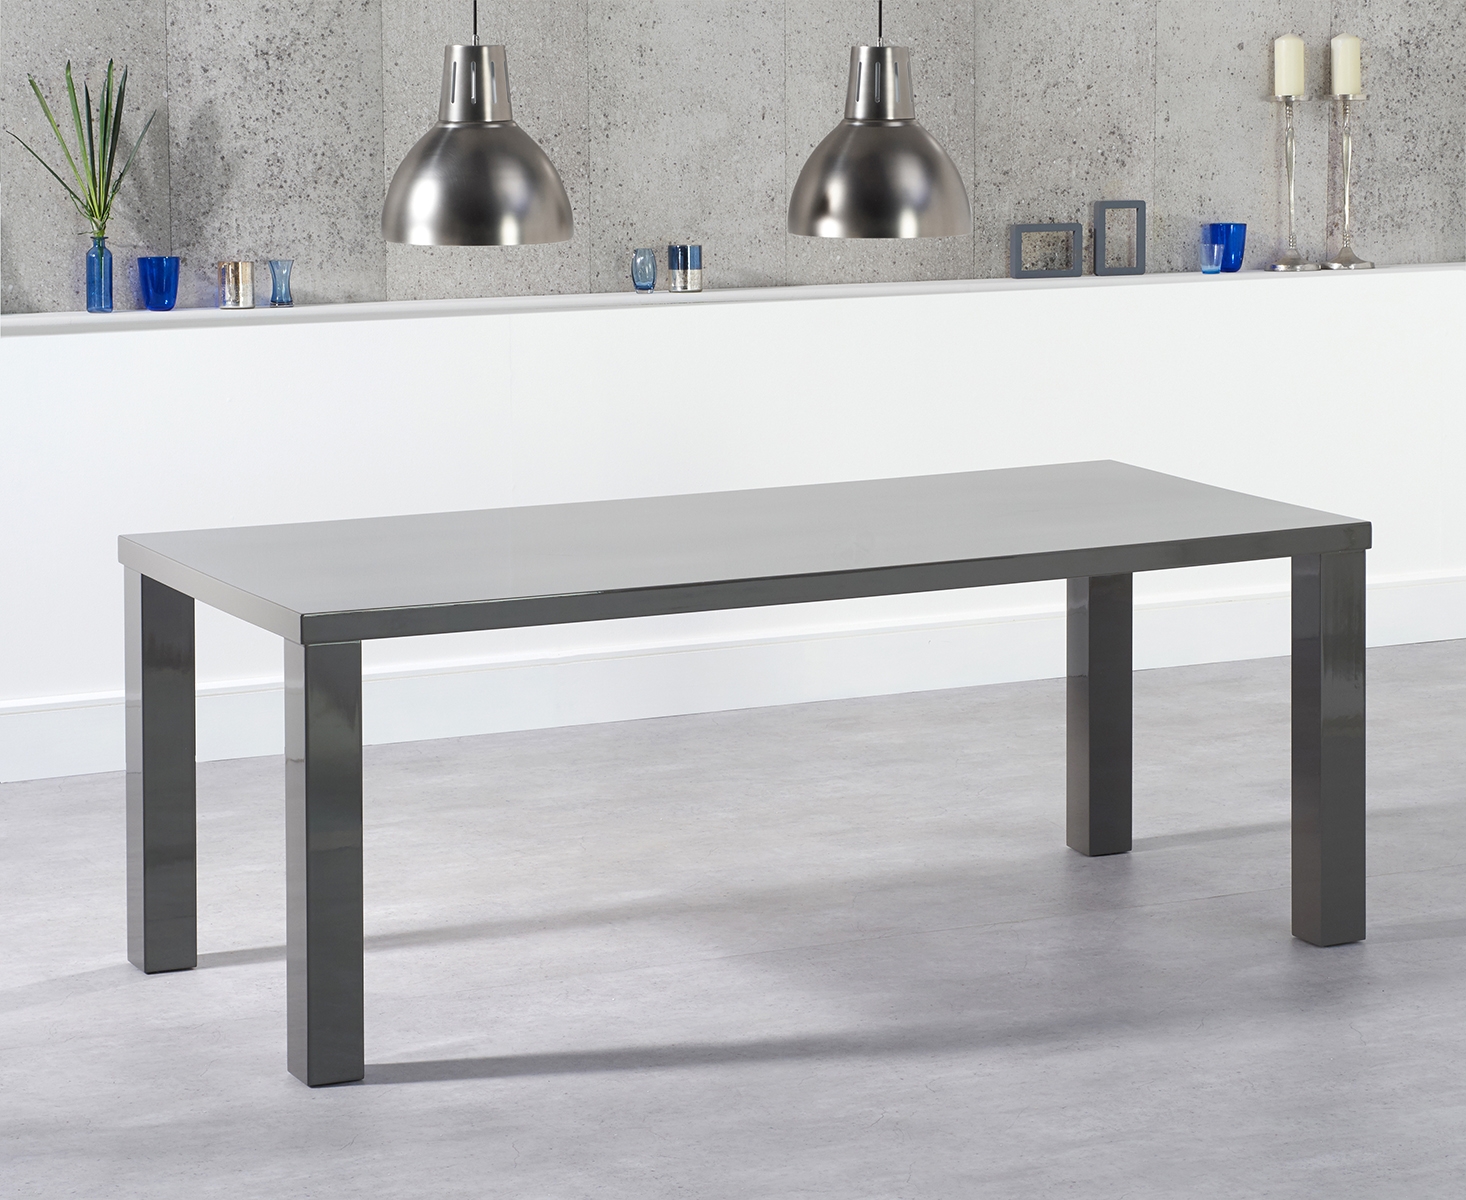 Photo 1 of Atlanta 200cm dark grey high gloss dining table with austin benches with backs